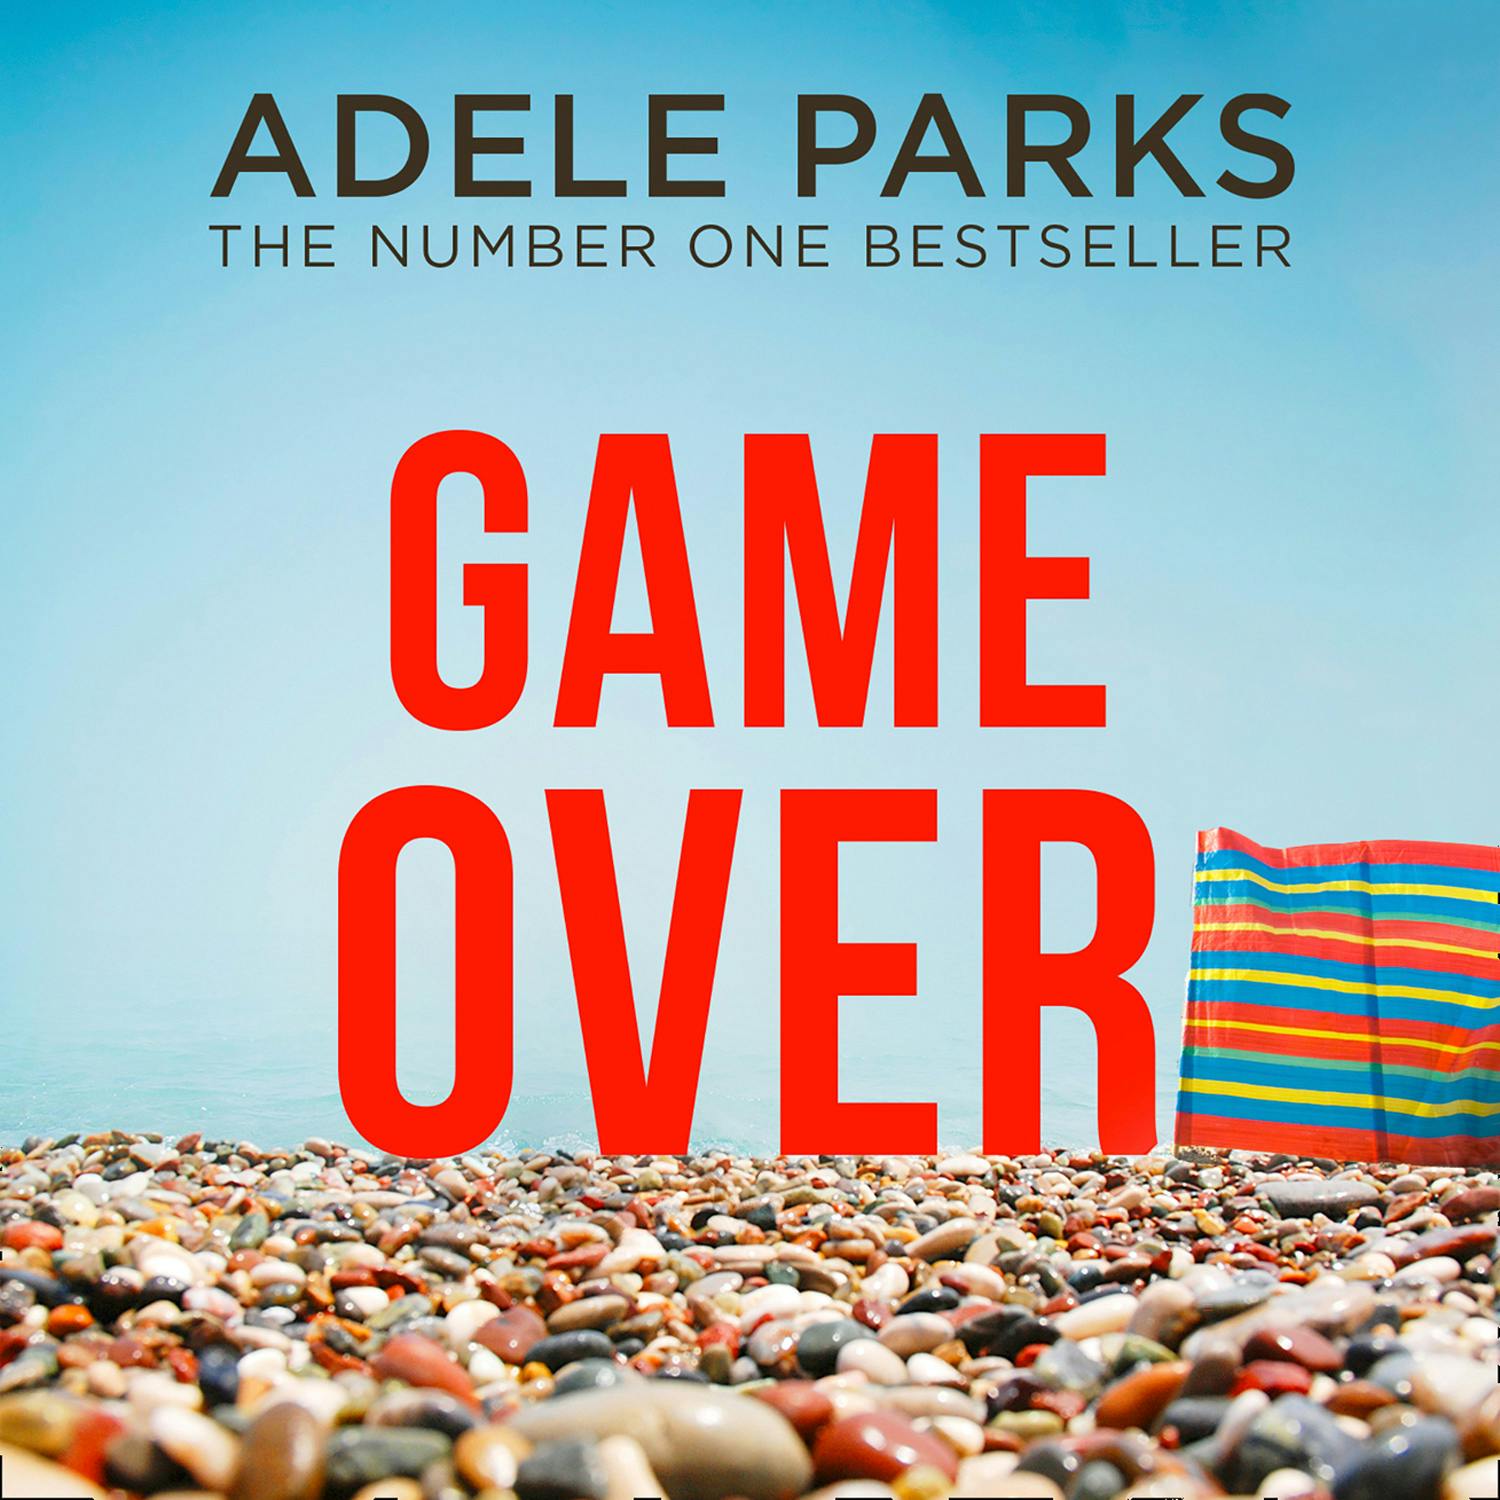 Game Over - Adele Parks